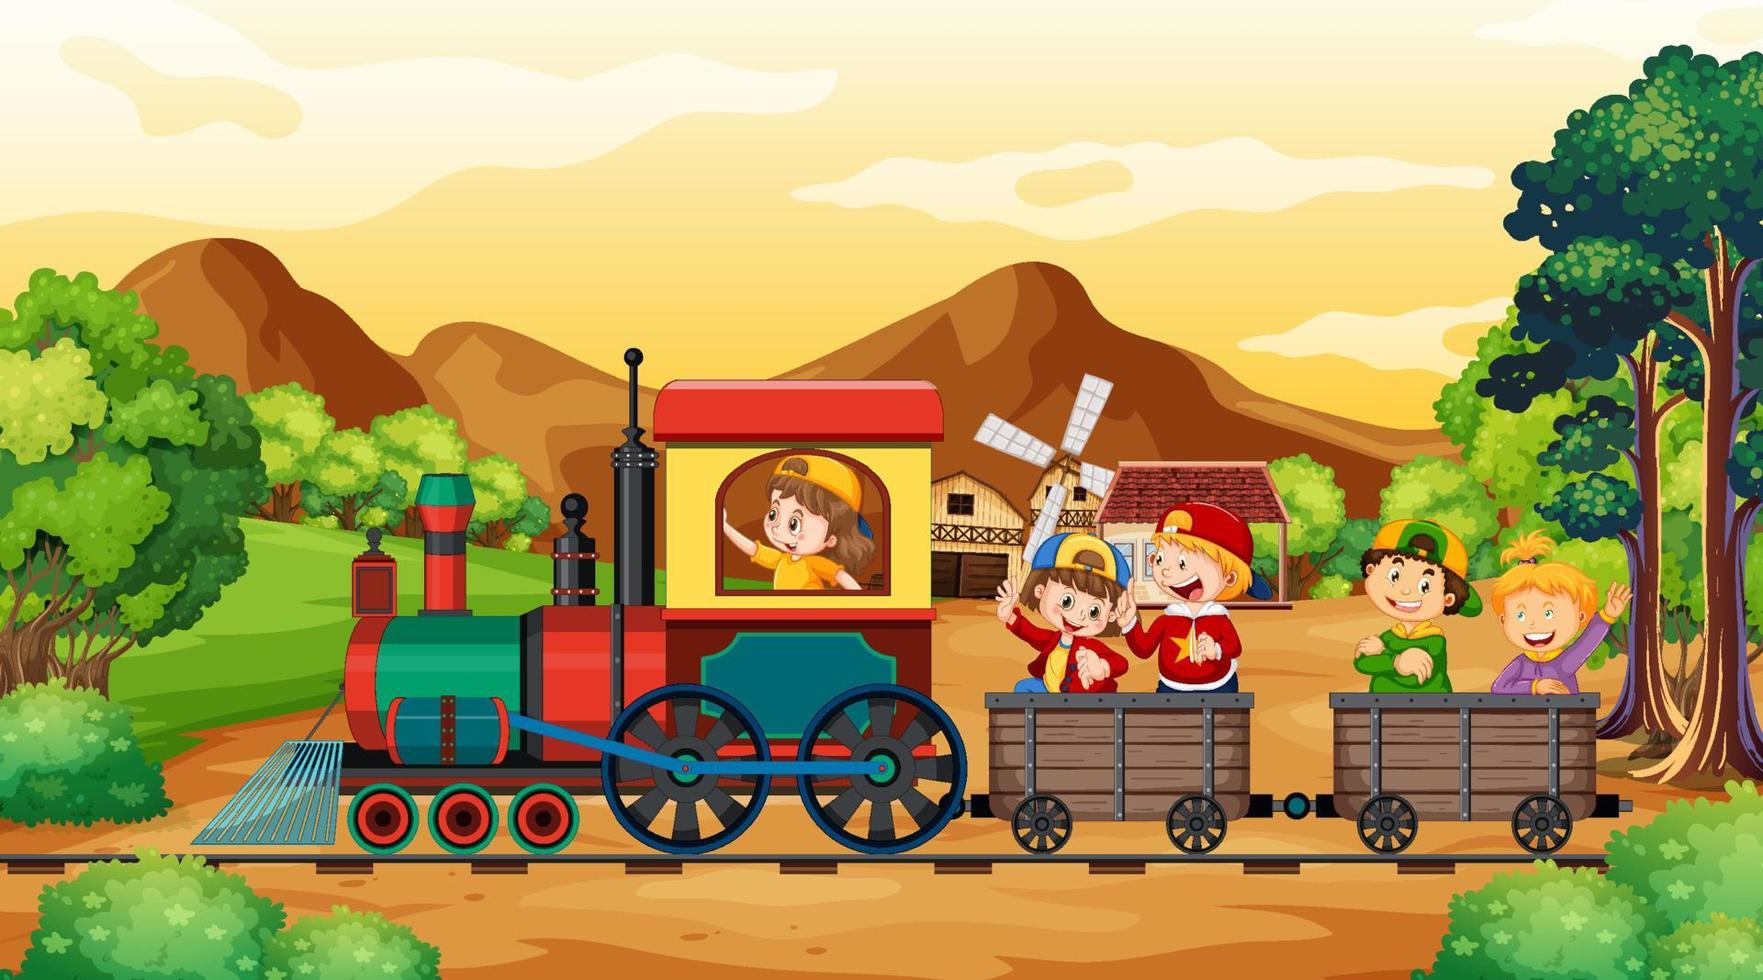 A kids in a train with natural scene vector